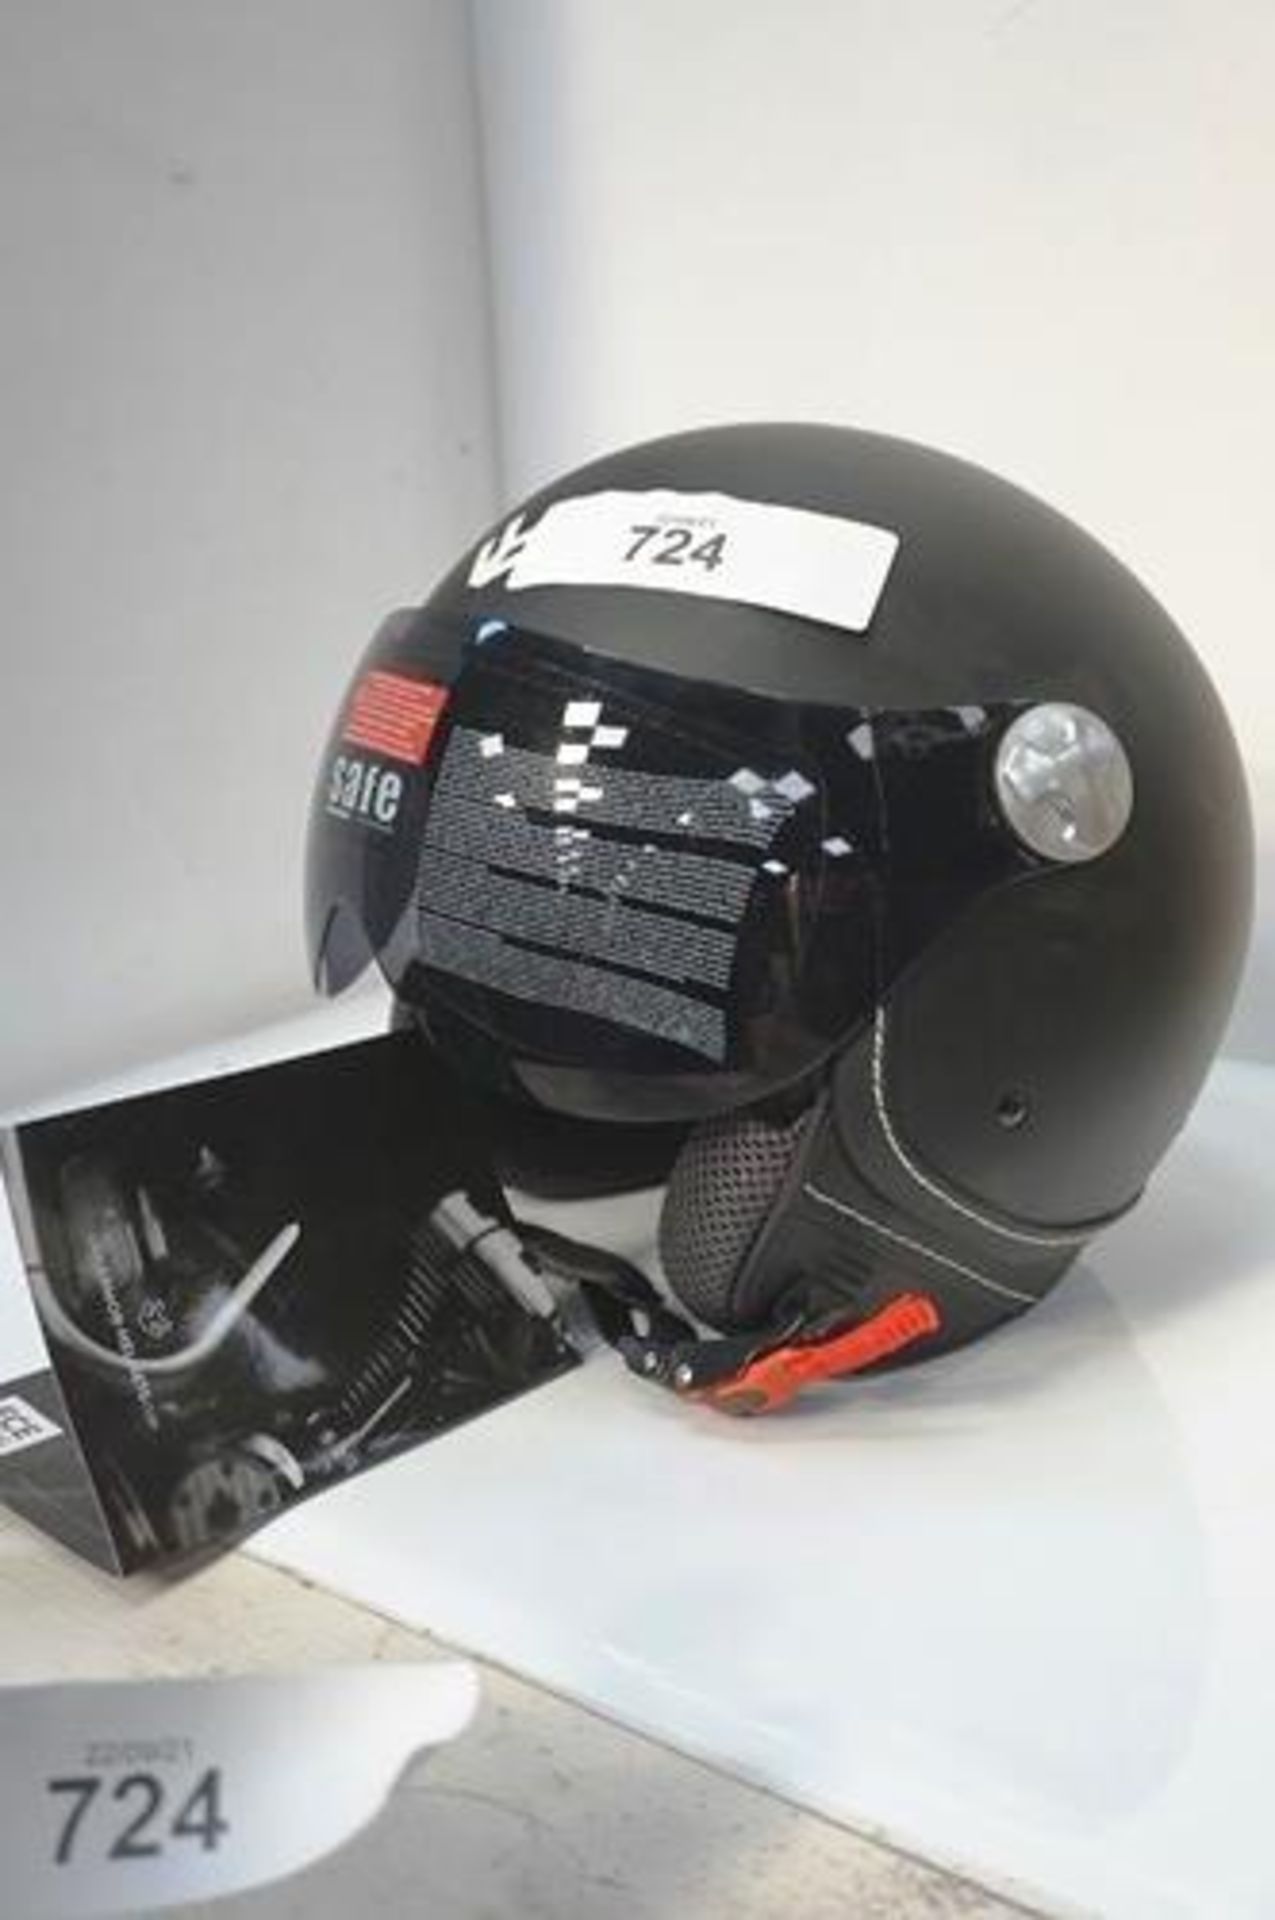 1 x Armor black motorcycle helmet, type ECE 22-05, size 55-56 - New with tags (GS15)